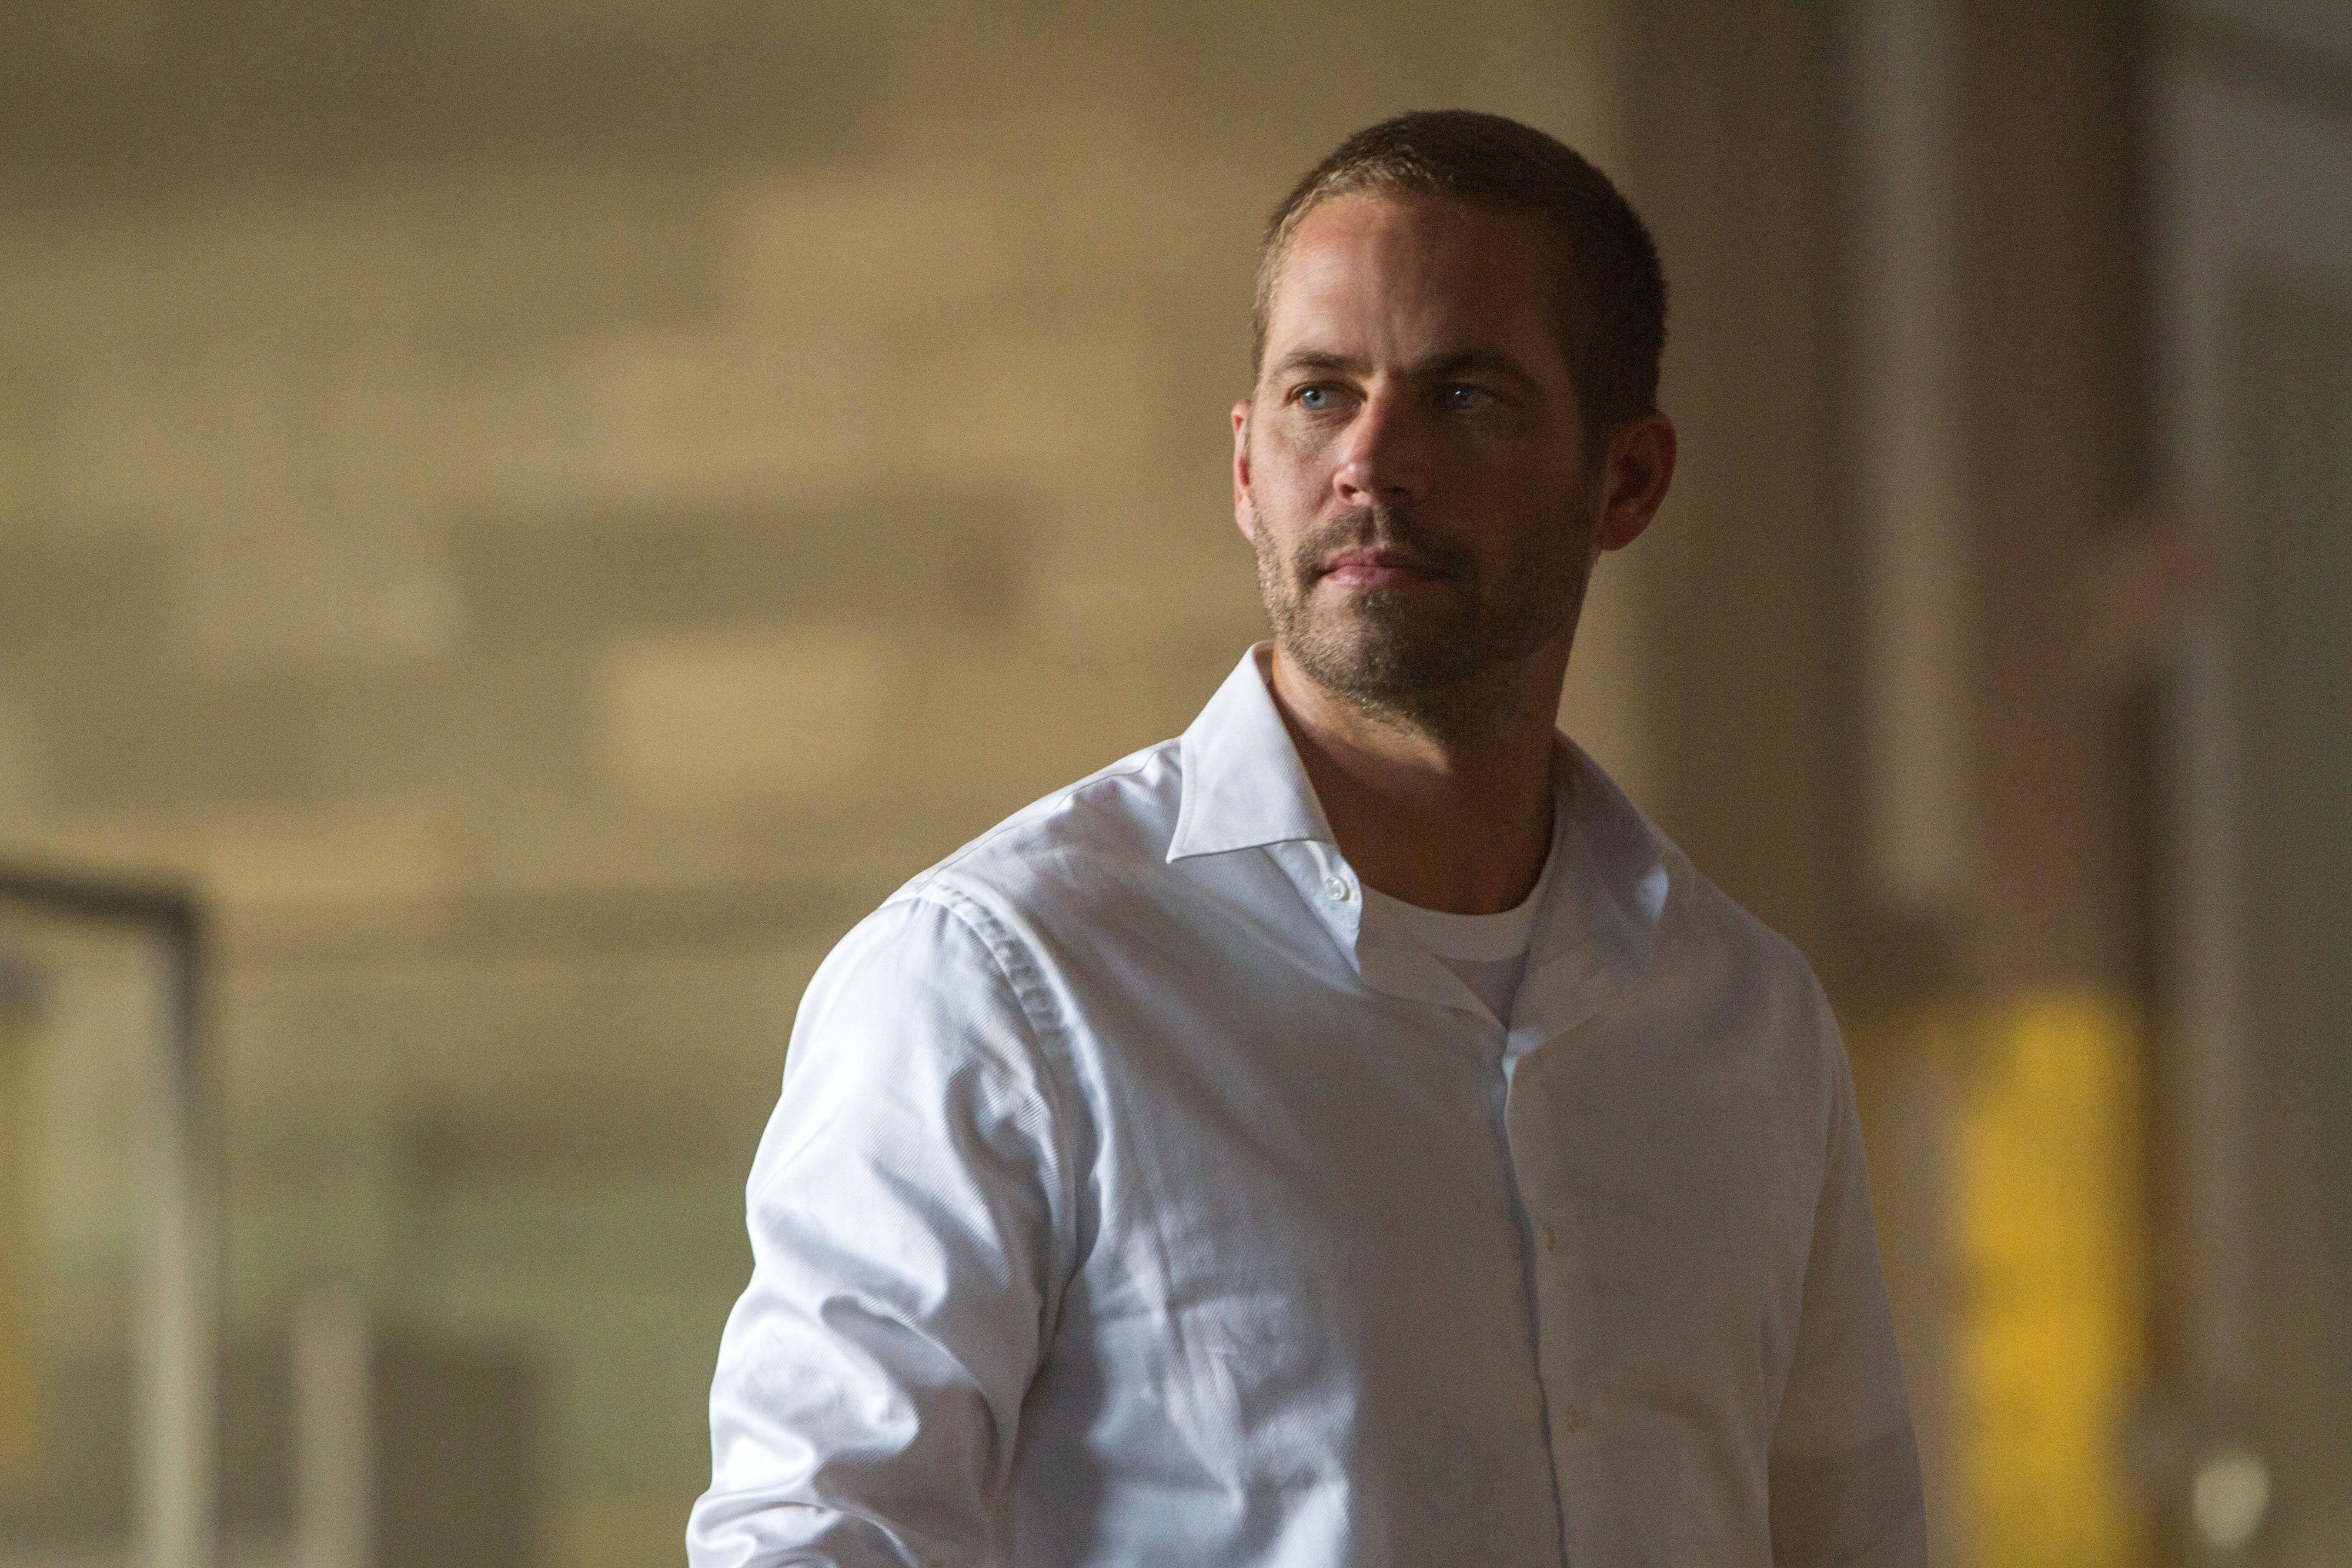 Paul Walker stares off-screen while inside of a building